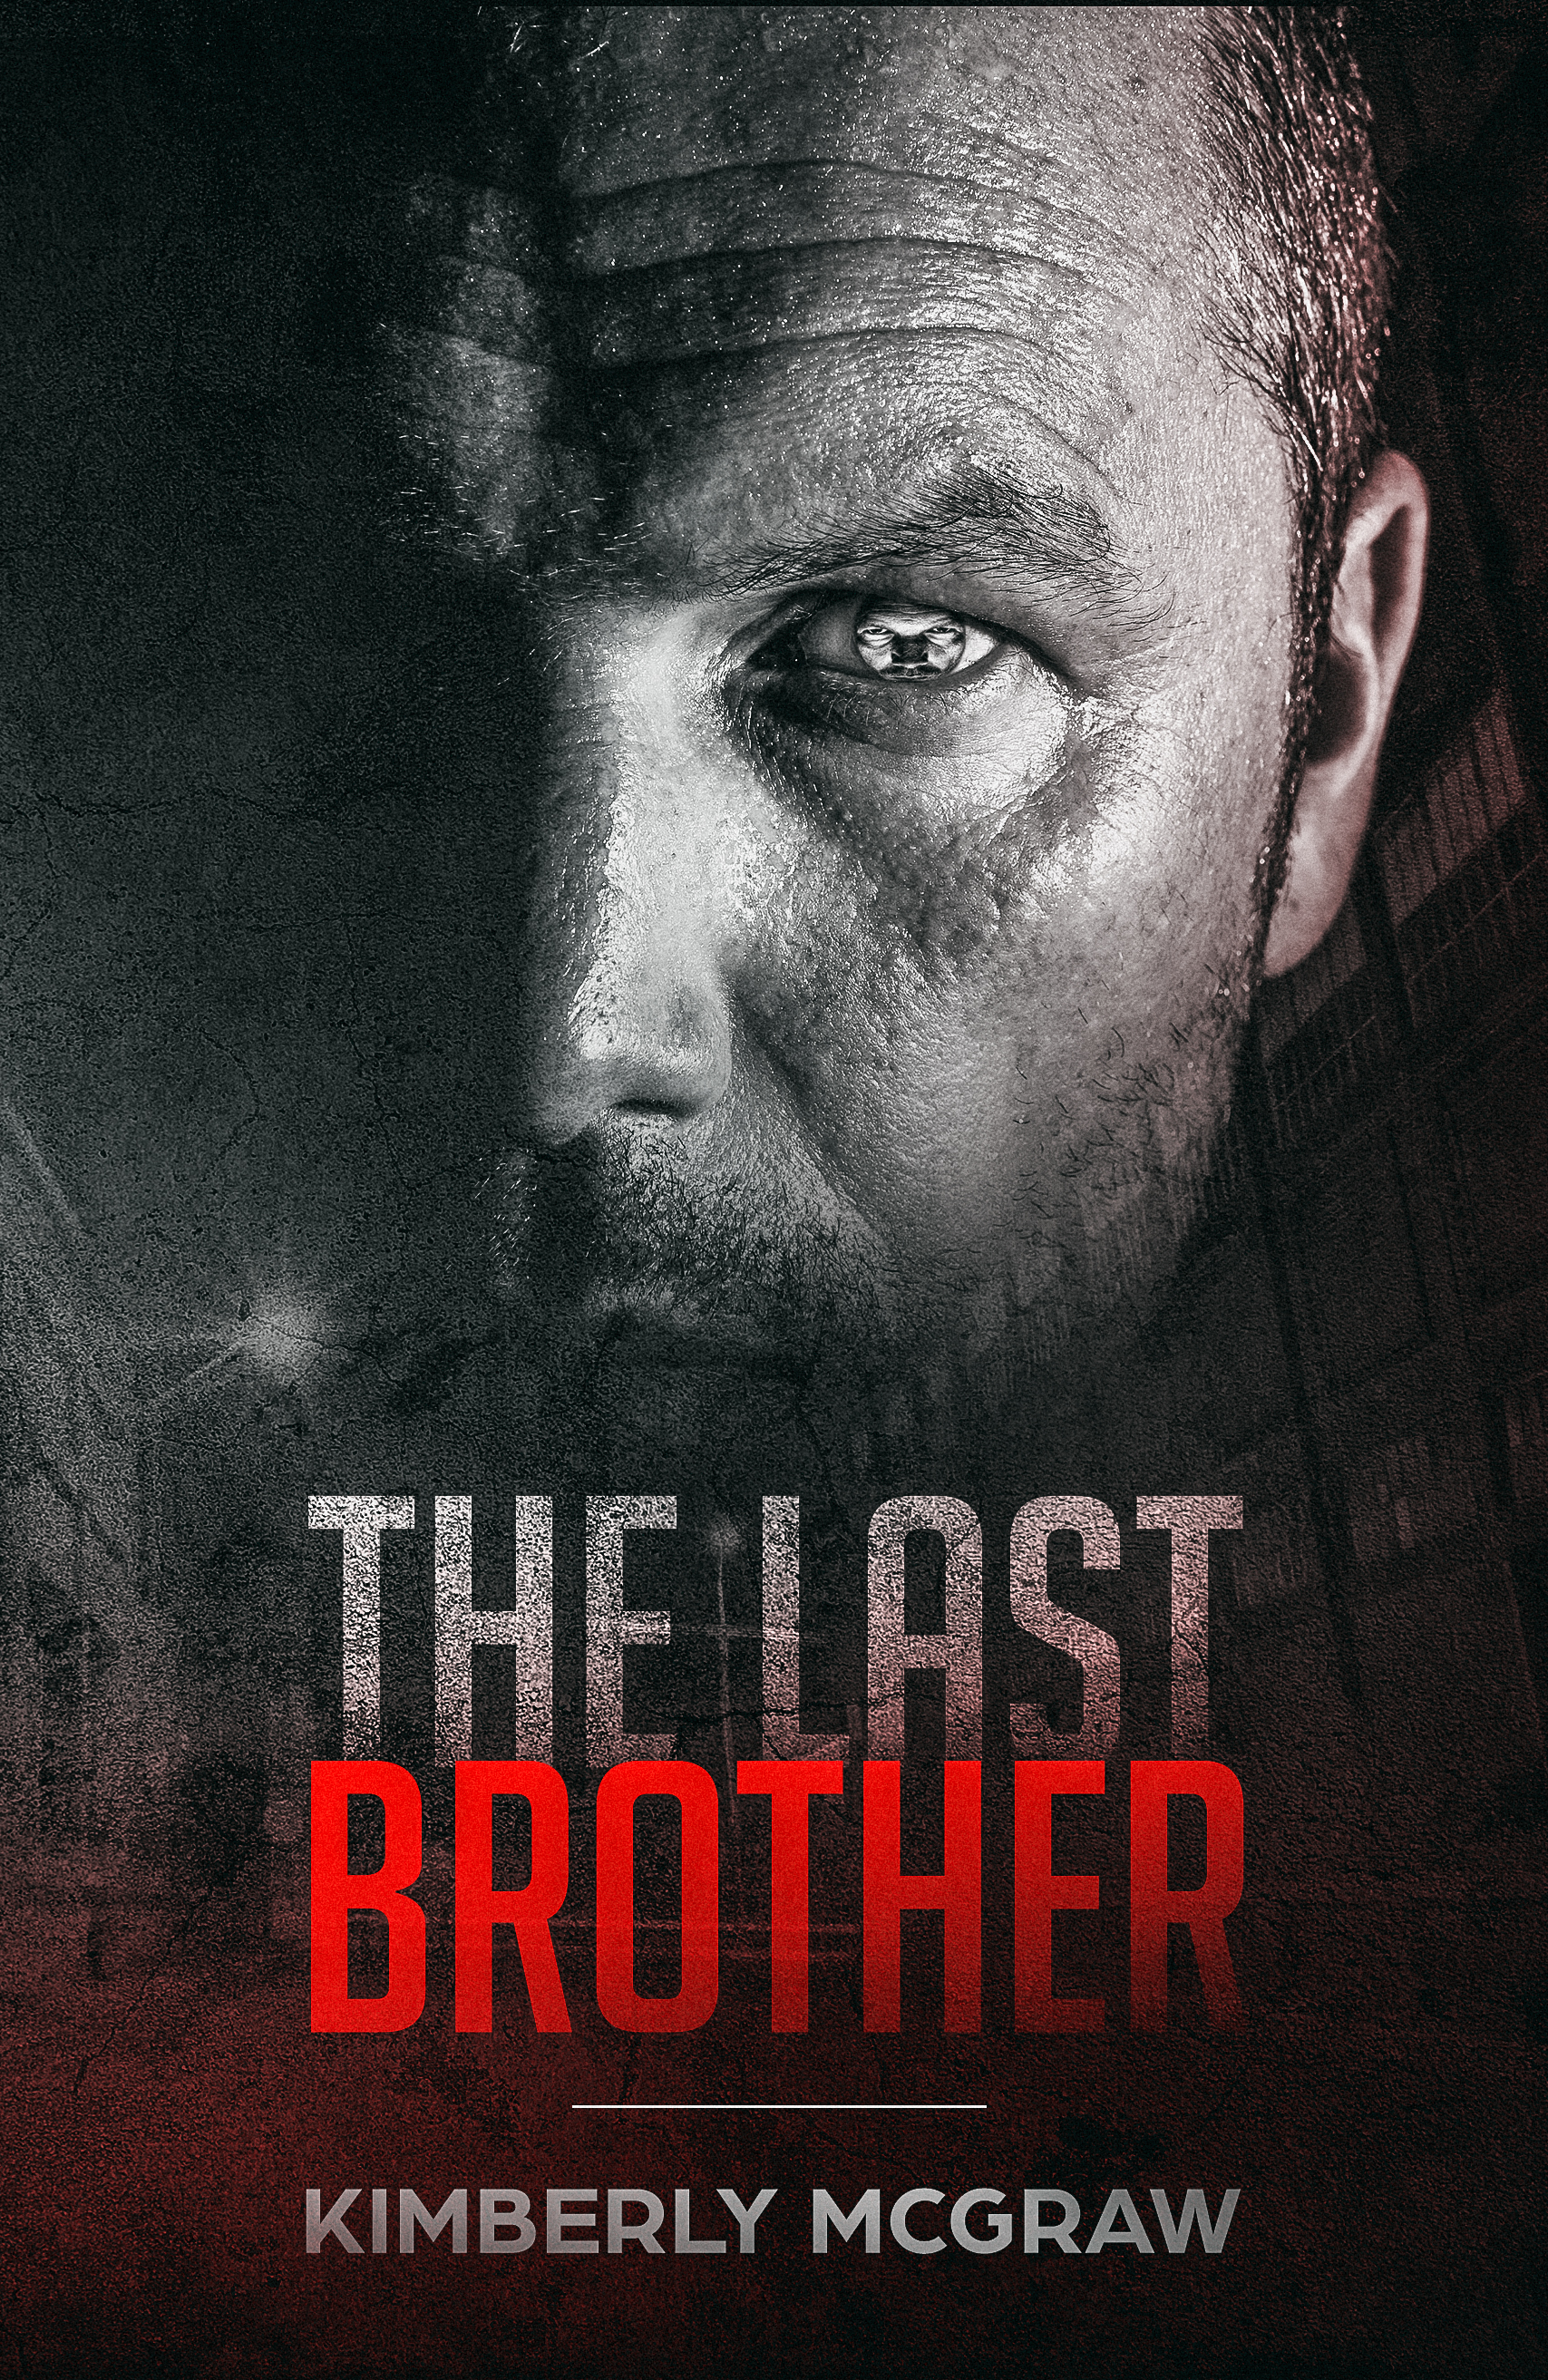 FREE: The Last Brother by Kimberly McGraw